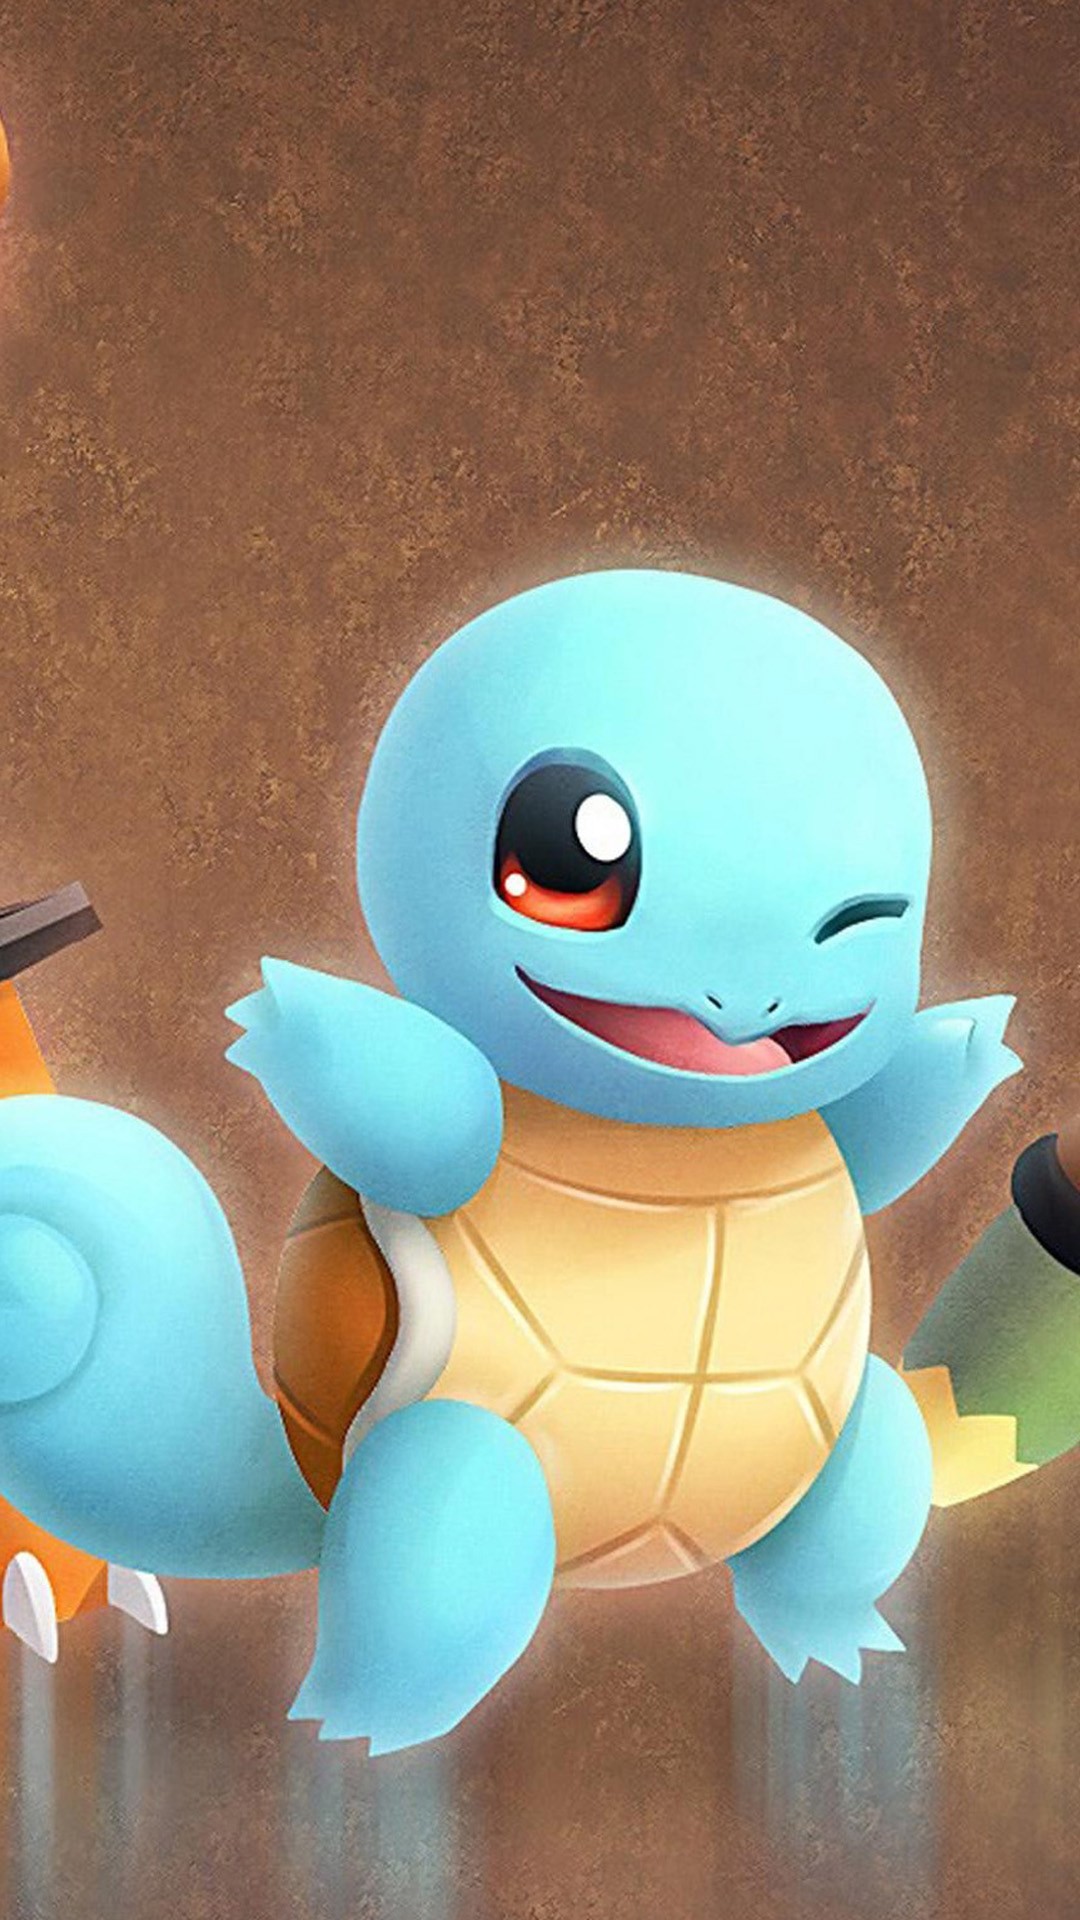 1080x Cute iPhone Wallpaper Data Id 100279 Turtwig And Squirtle